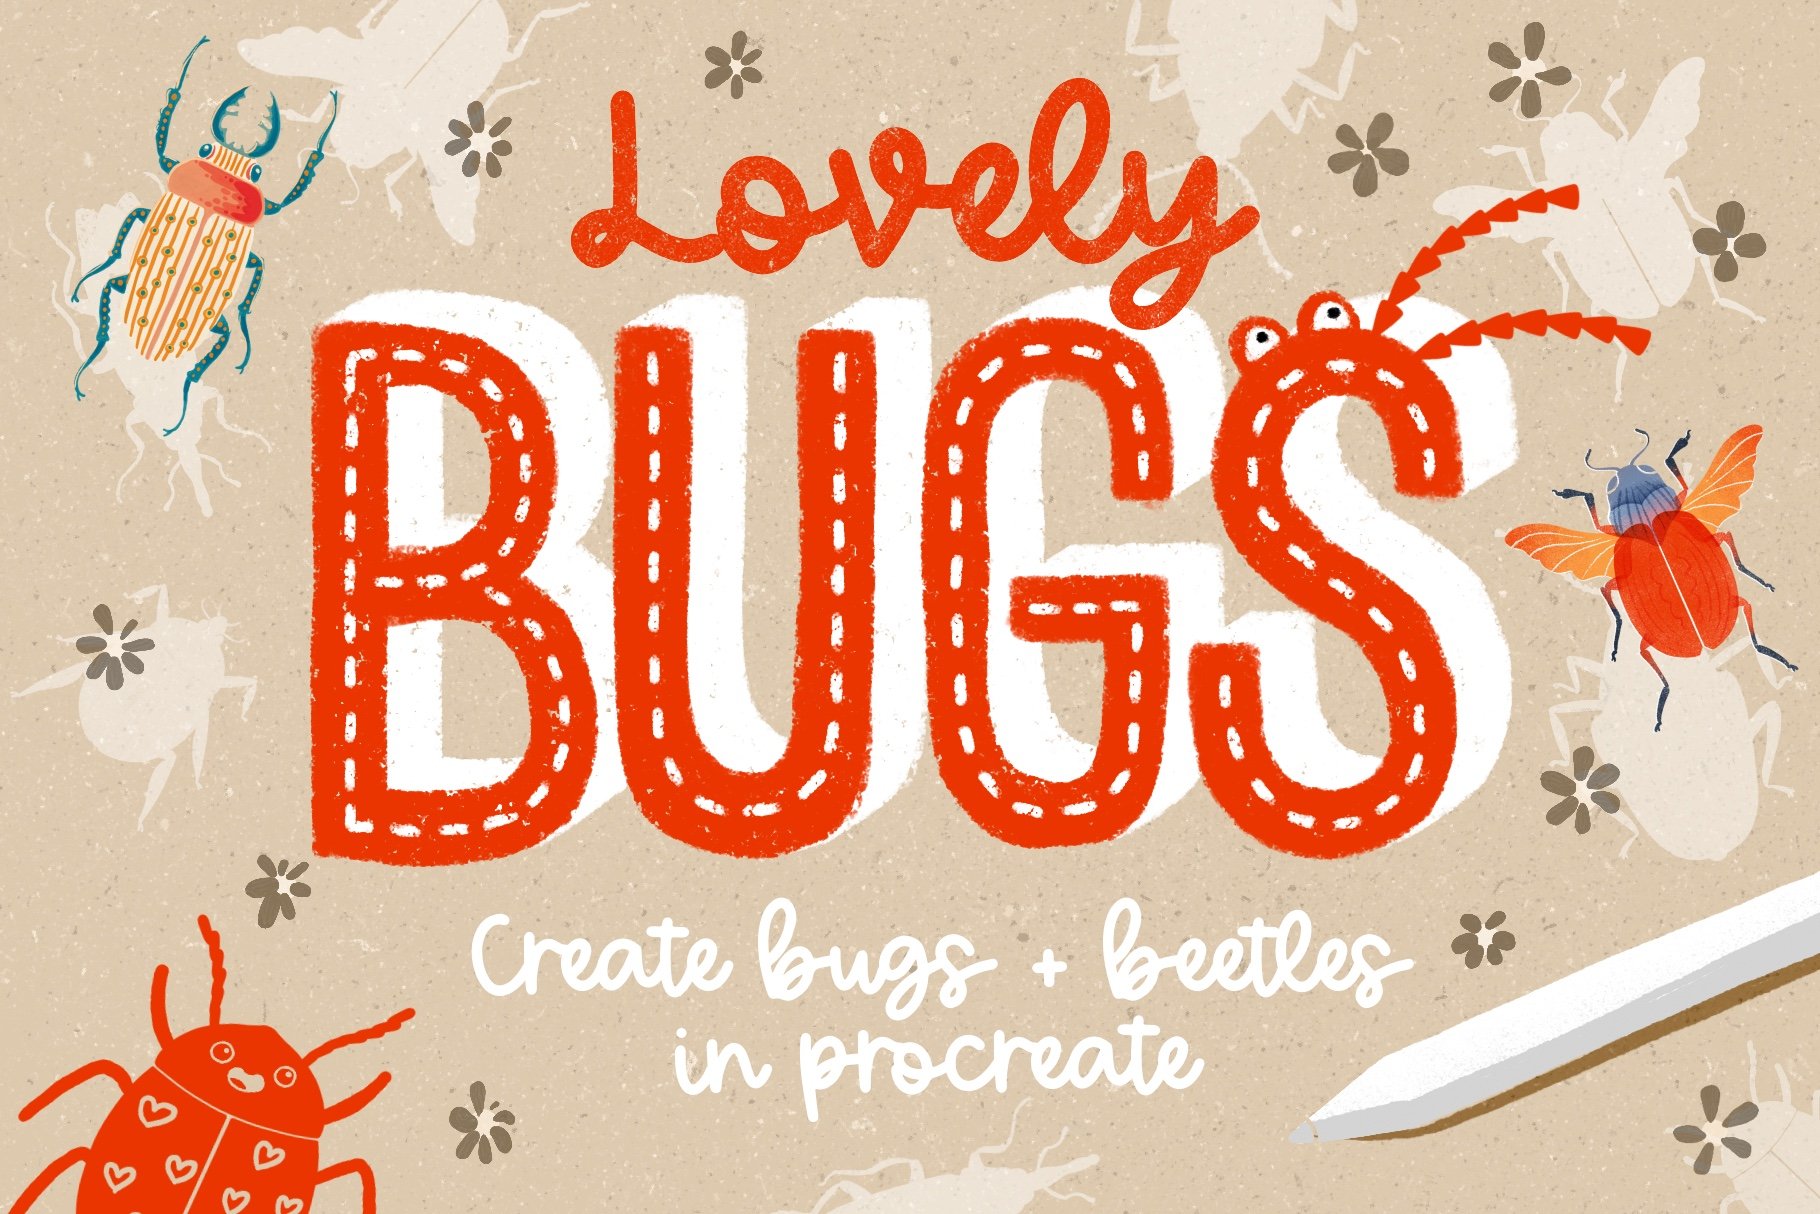 Lovely Bugs for Procreatecover image.